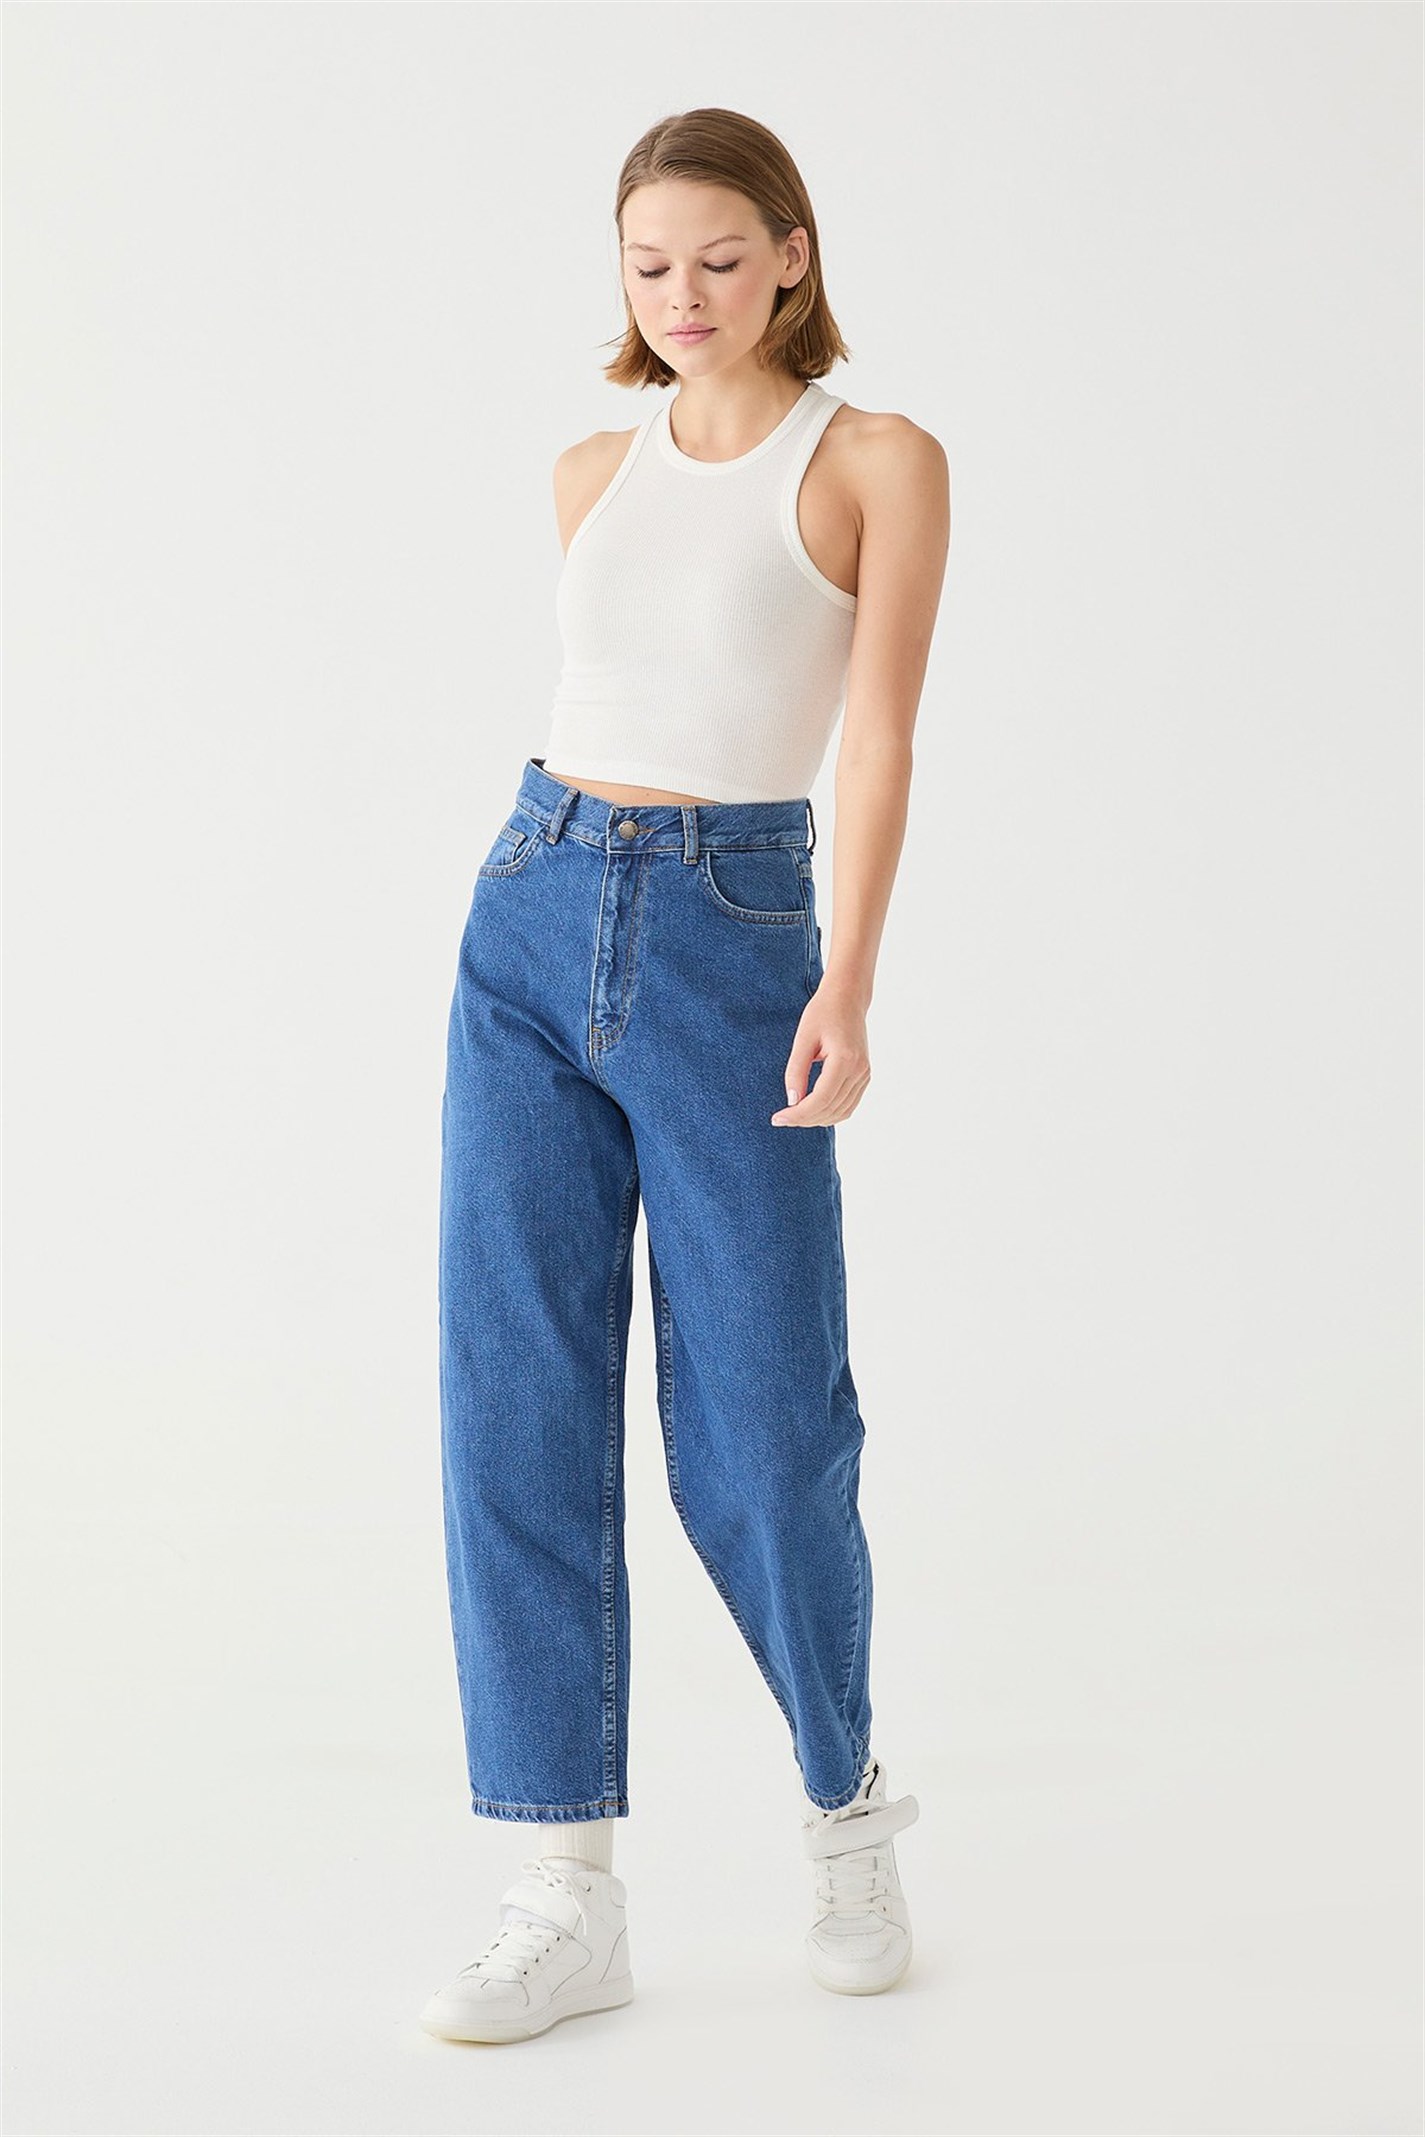 Blue Balloon Jean | Suud Collection